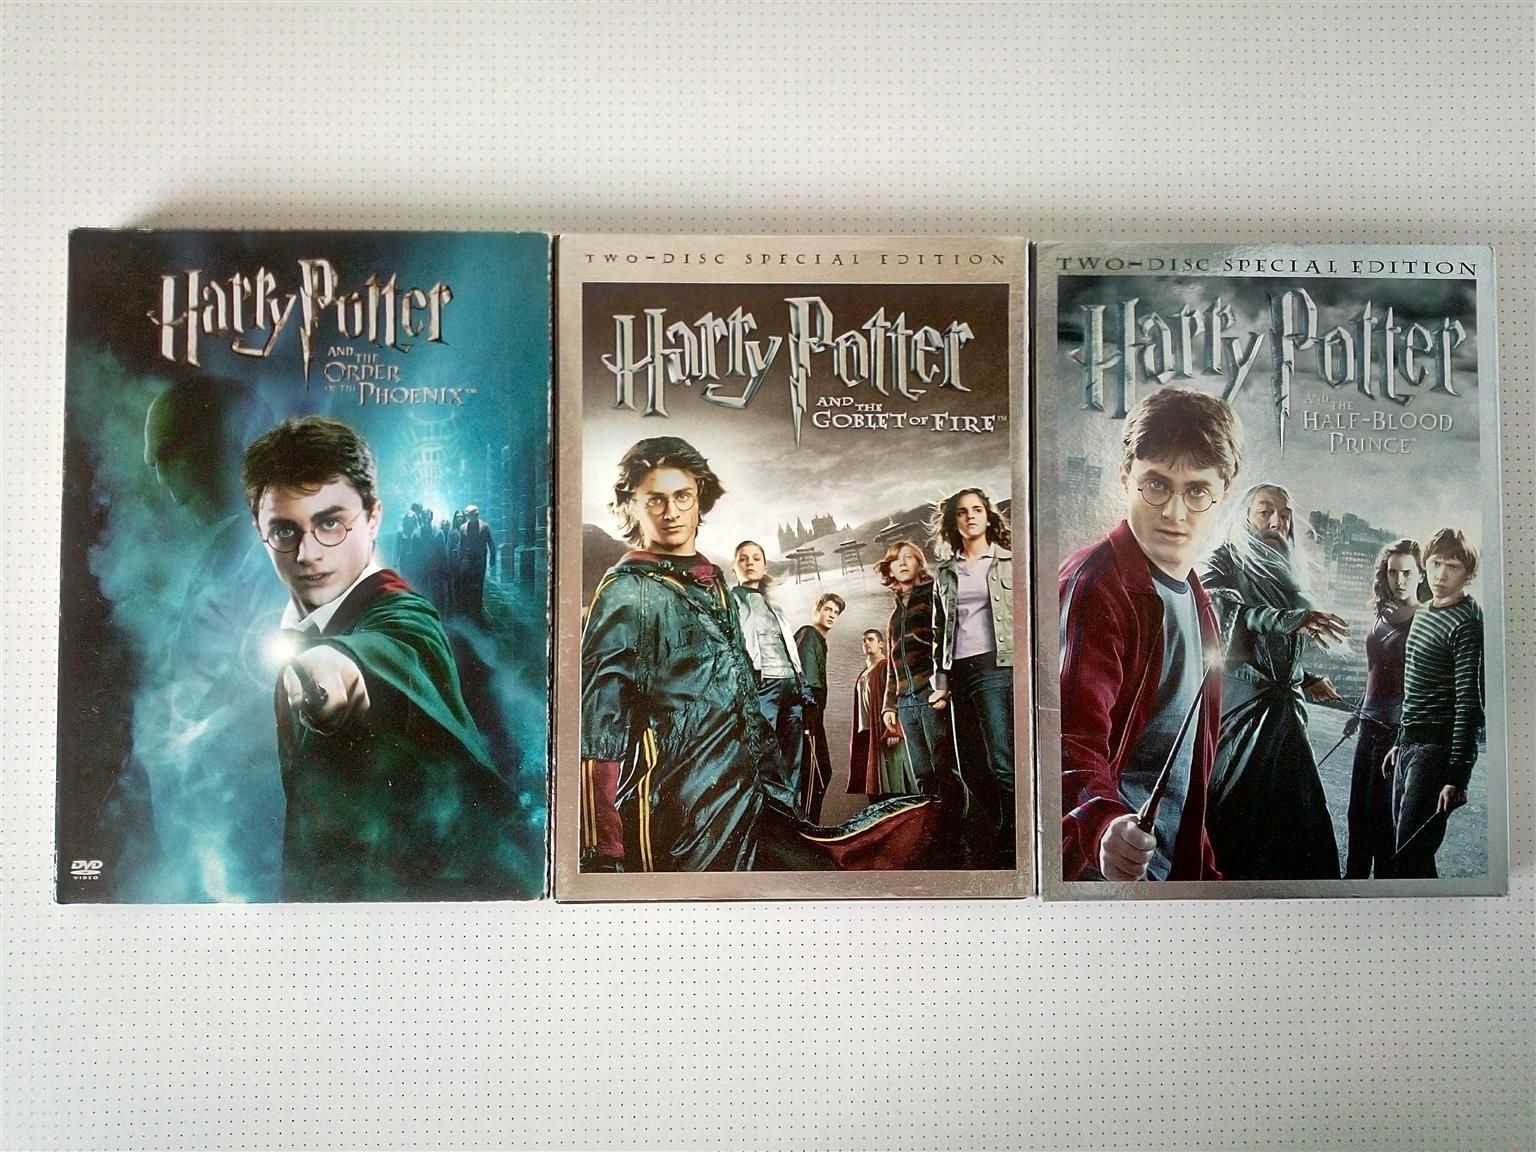 Harri Potter two disc special edition.